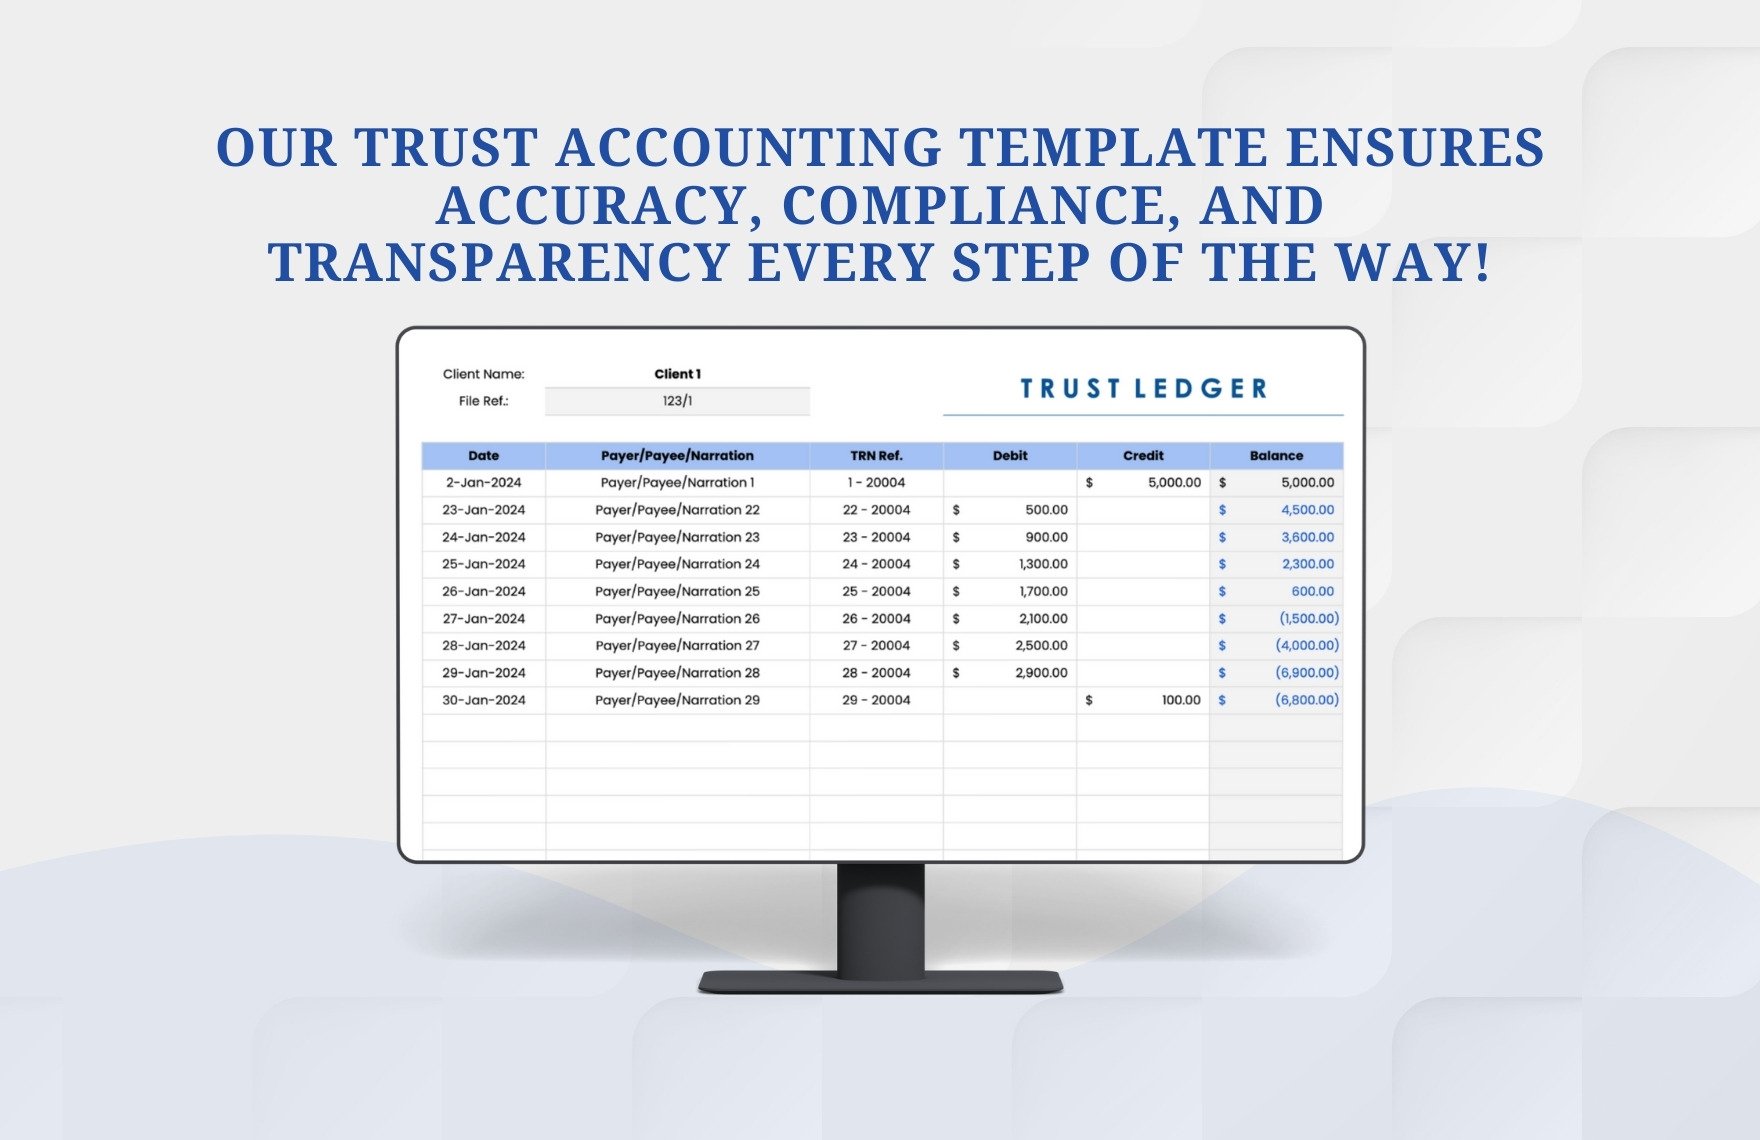 Trust Accounting Template